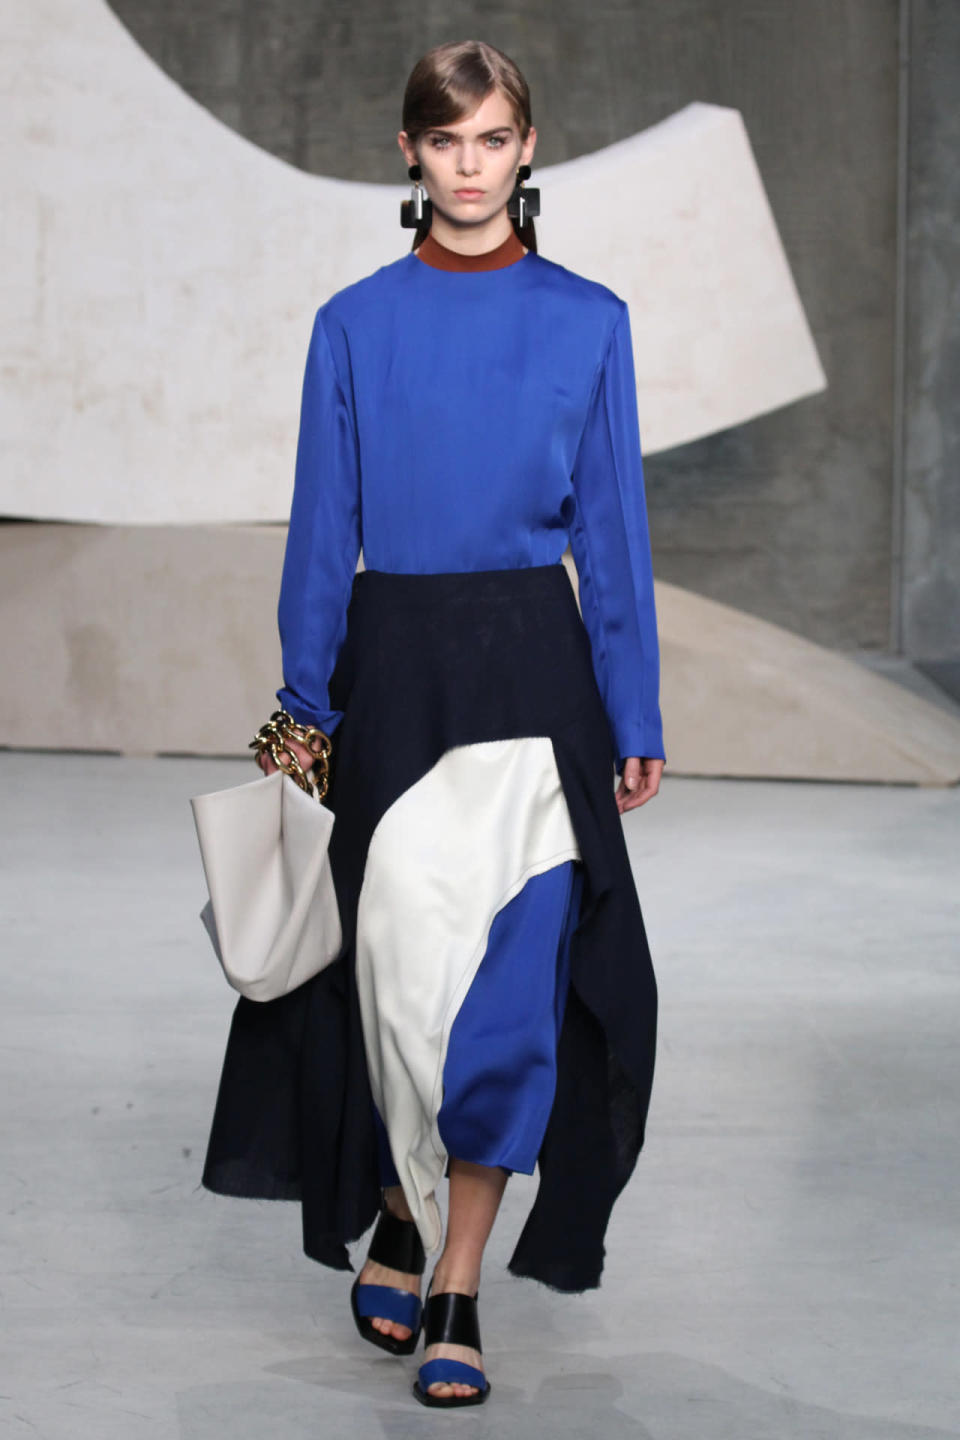 A model wears a triple-layered look at Marni’s spring 2016 show in Milan. (Photo: Getty Images.)